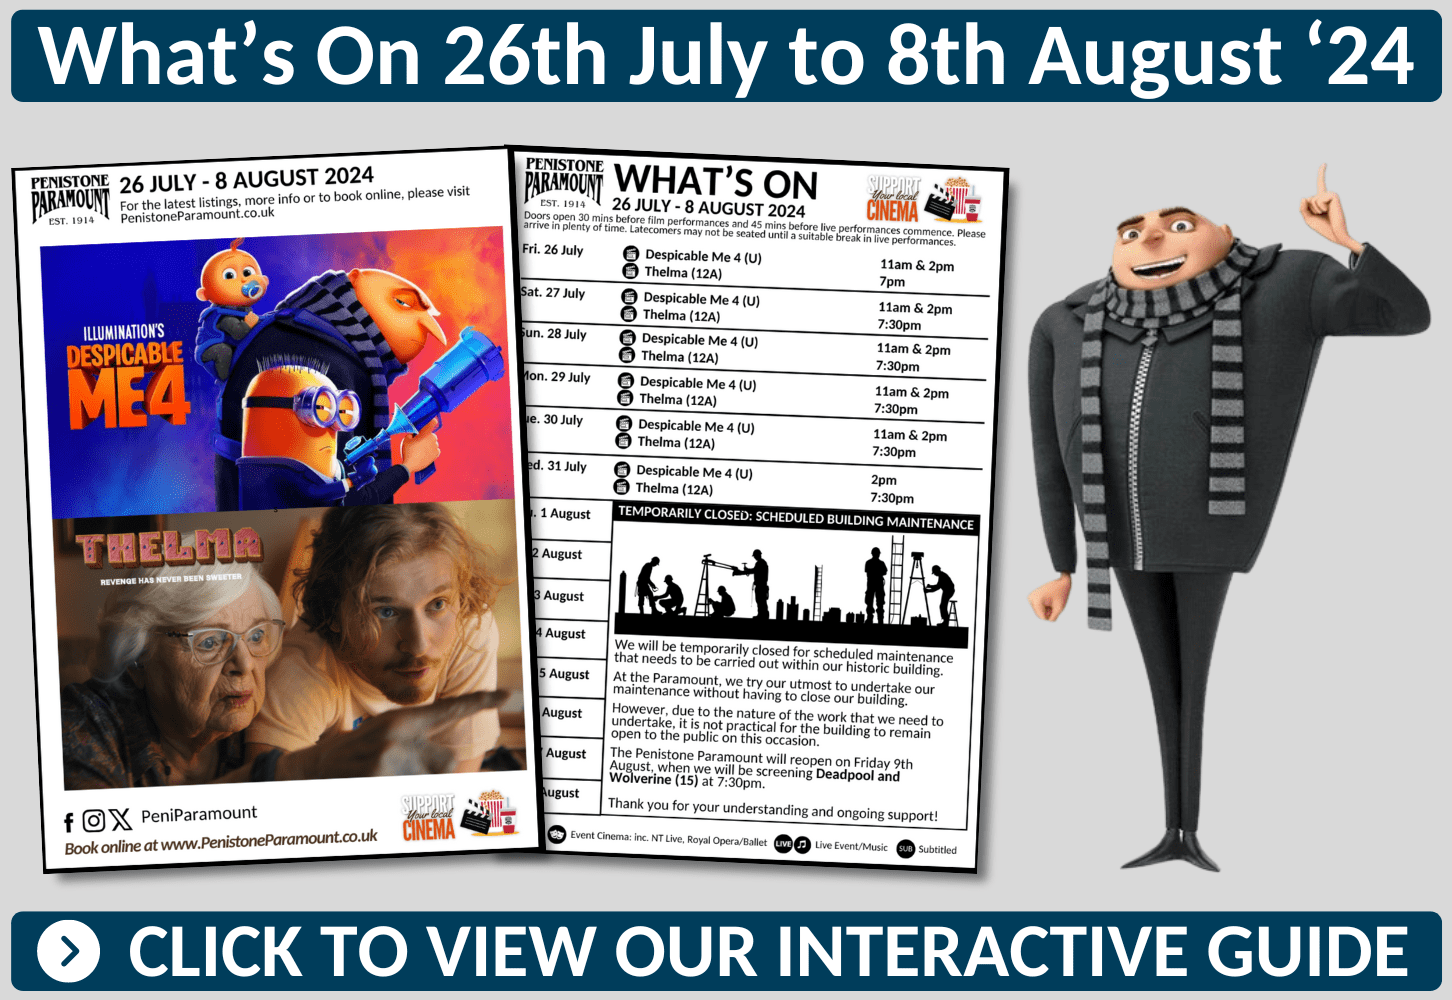 What's On - 26th July to 8th August 2024